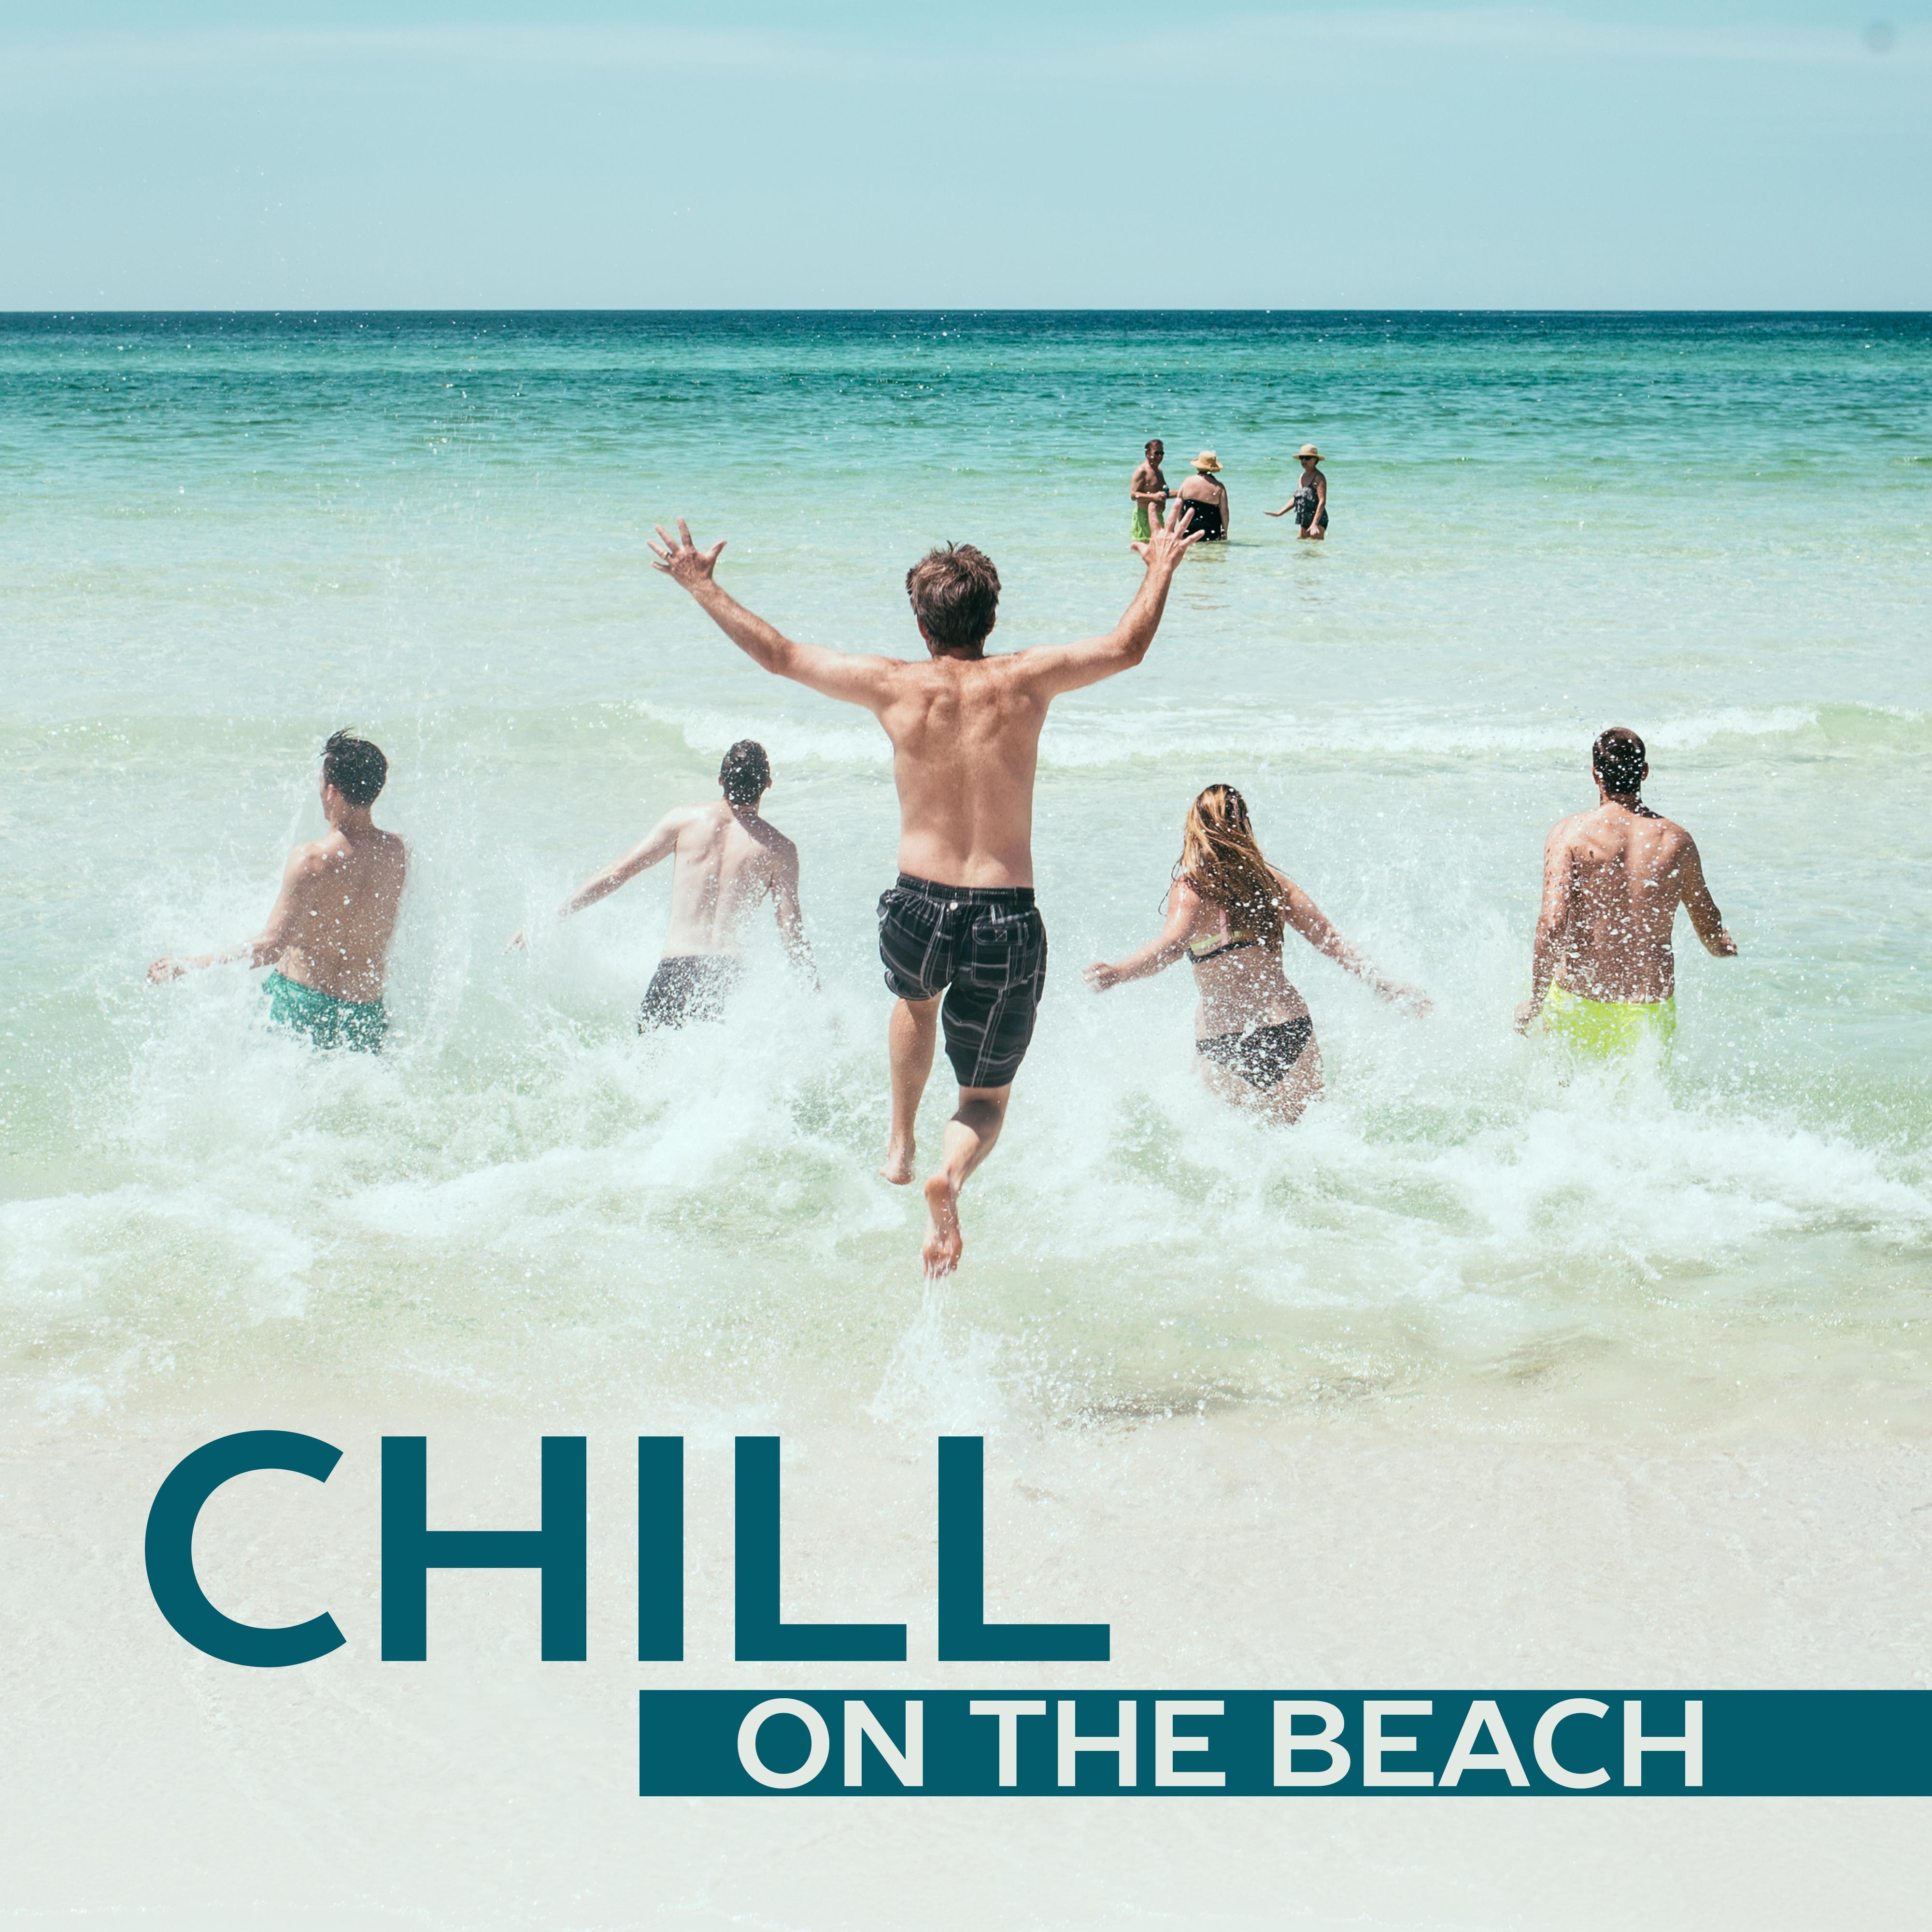 Chill on the Beach – Spa Music, Pure Massage, Soft Music for Wellness, Stress Relief, Relaxing Waves, Sounds of Sea, Spa Dreams